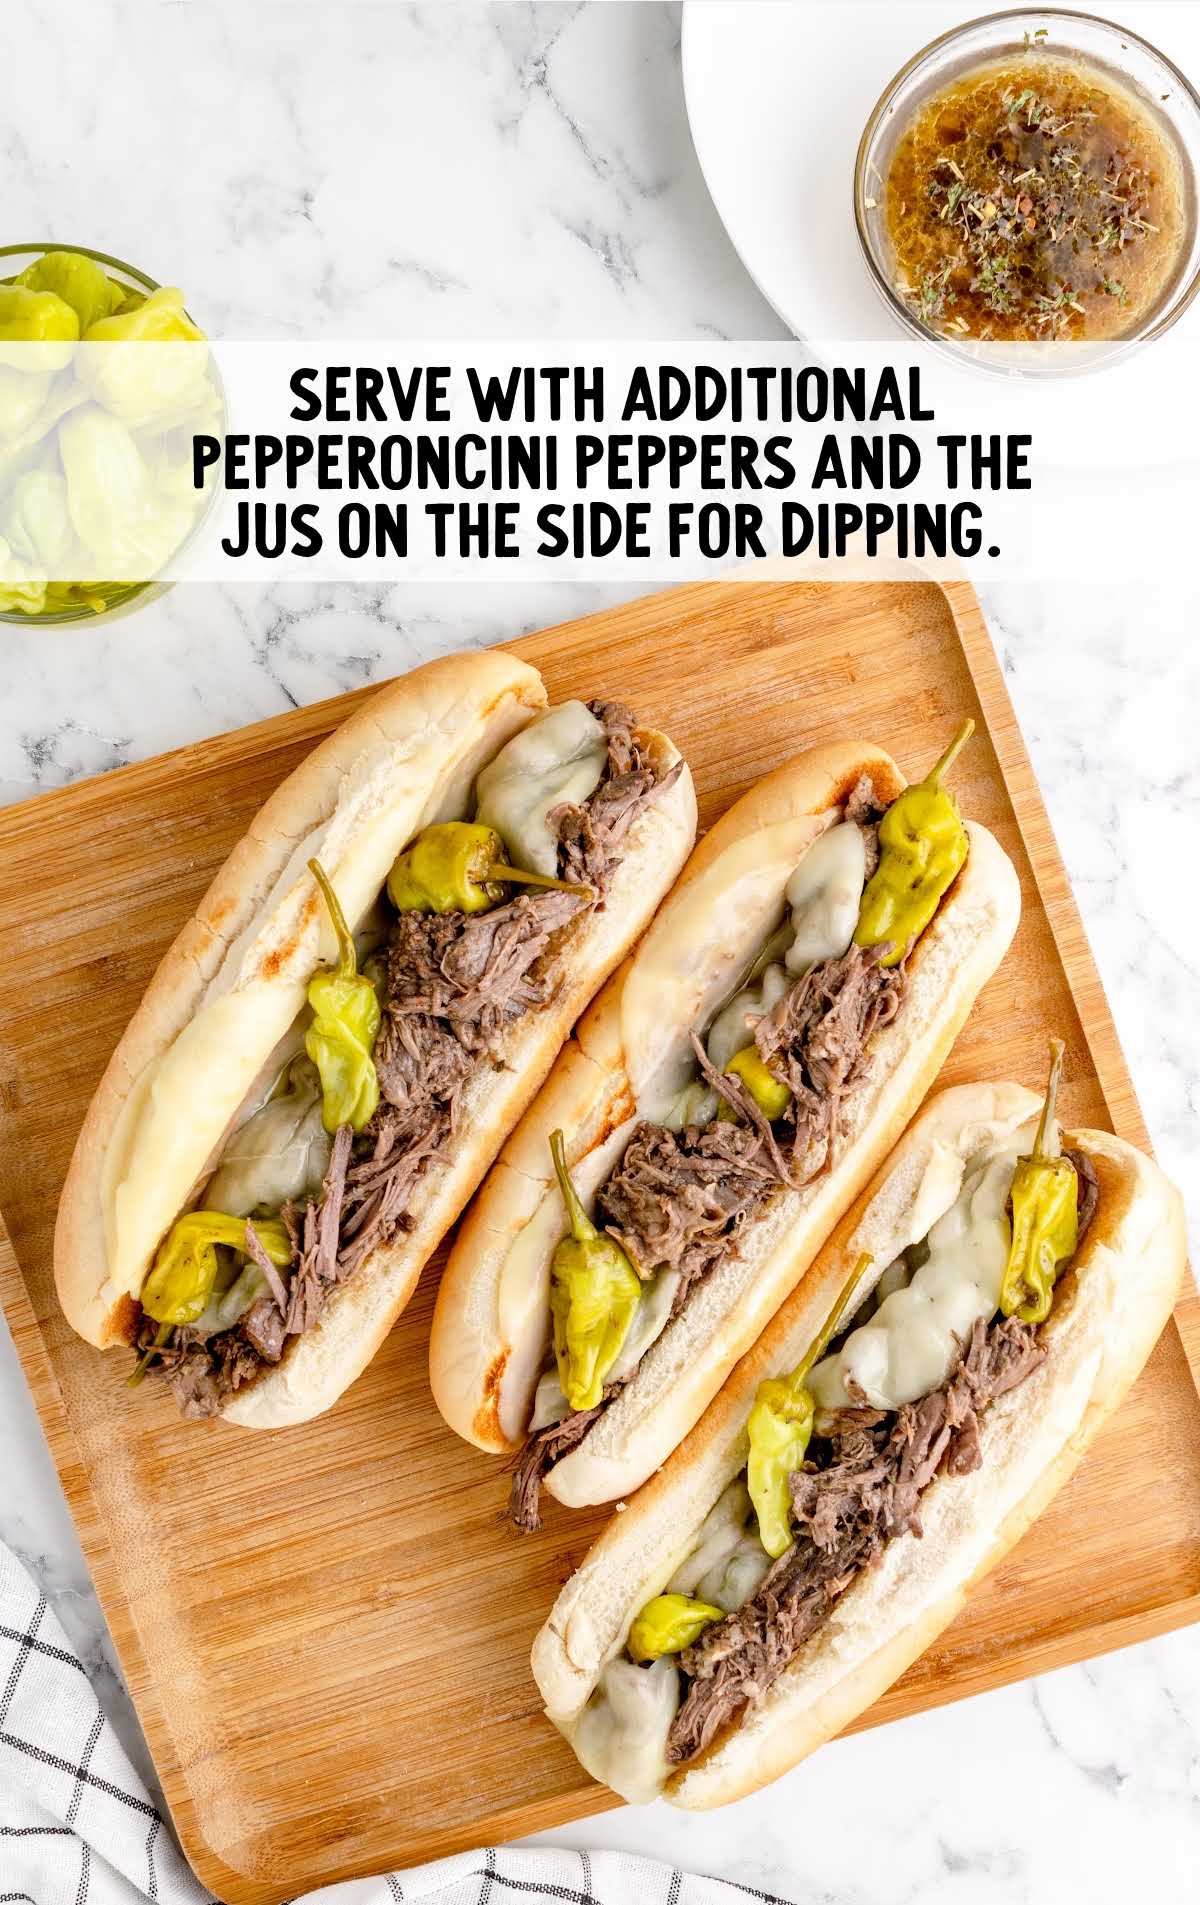 beef placed in a sub with pepperoncini peppers and beefy jus on the side